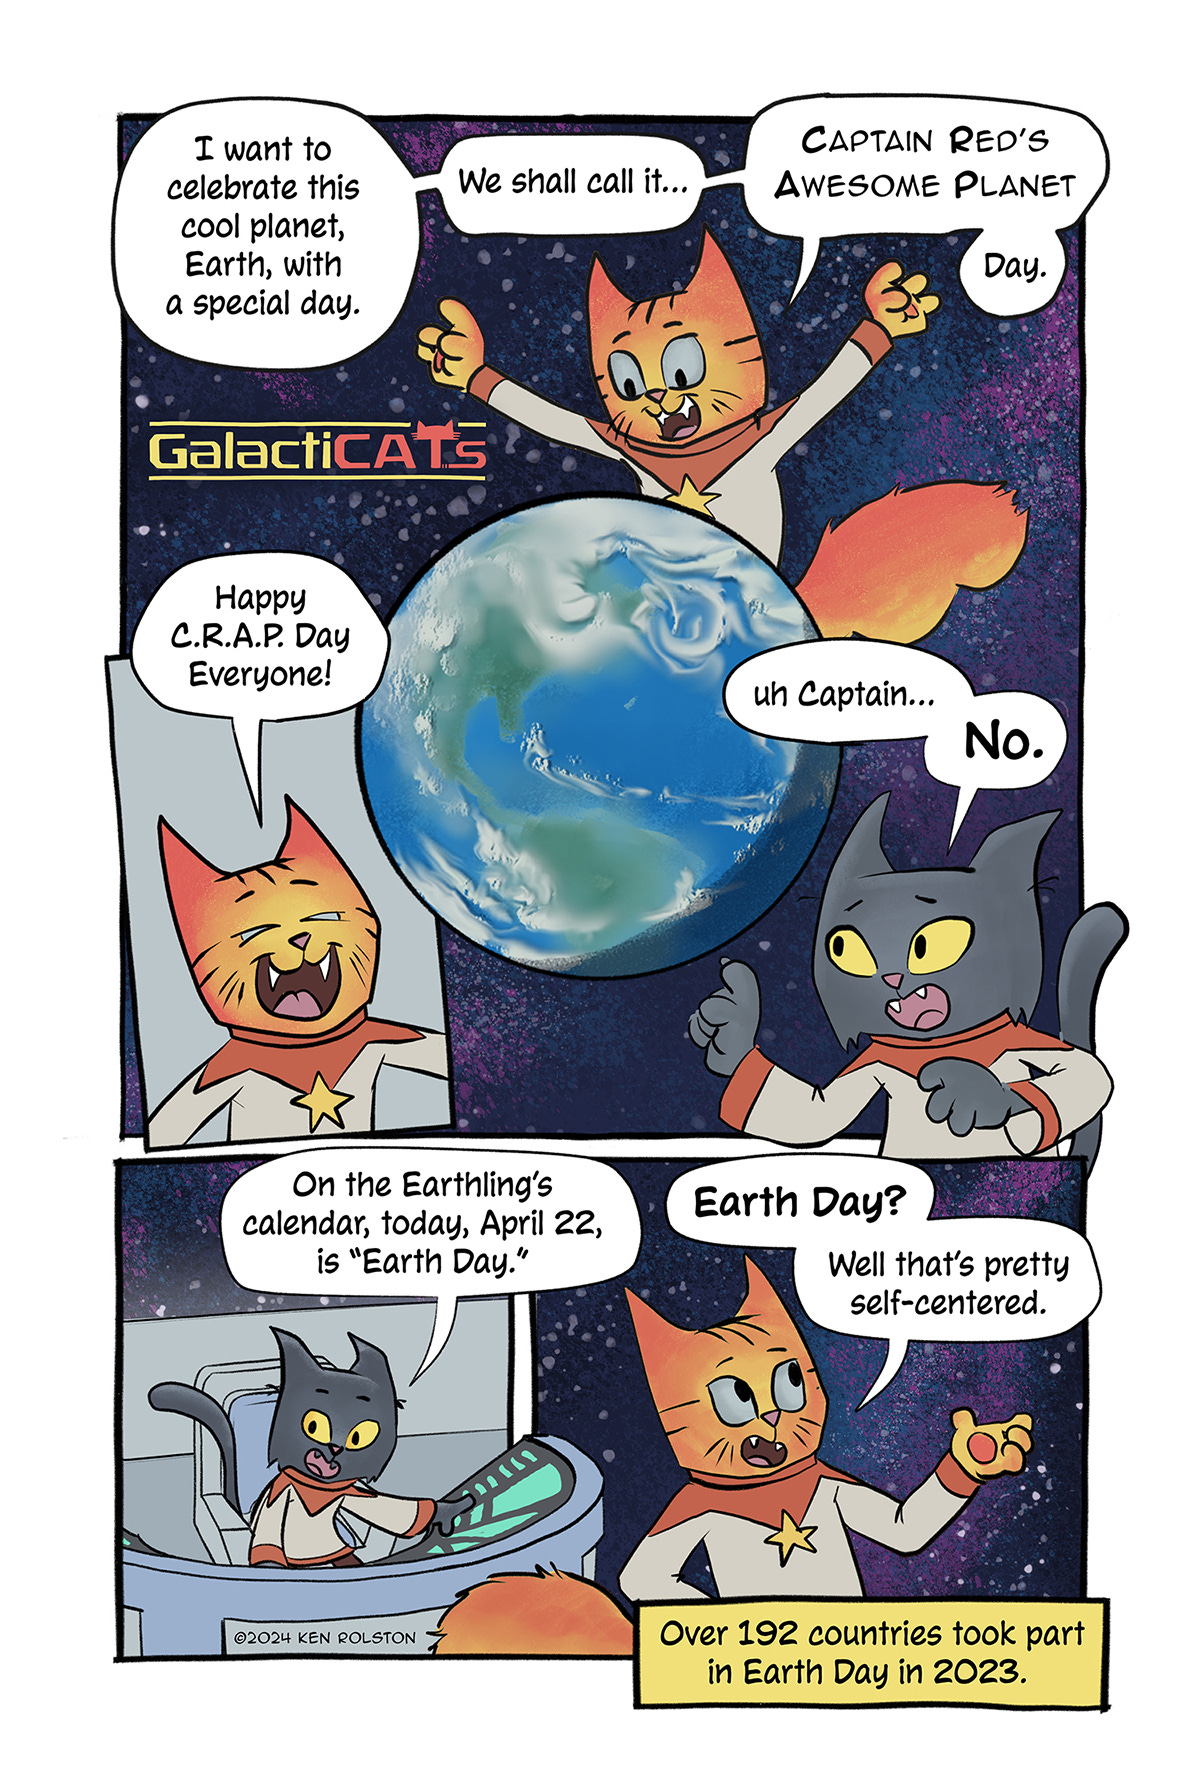 GalactiCATs - Earth Day.  Captain Red stands over a hologram of the planet Earth. He says, “I want to celebrate this cool planet, Earth, with a special day. We shall call it… Captain Red’s Awesome Planet… Day.” Panel 2: Captain Red shouts, “Happy C.R.A.P. Day Everyone!” Number One stops him, “Uh Captain…No.” She tells him, “On the Earthling’s calendar, today, April 22, is ‘Earth Day.’” Captain Red responds, “‘Earth Day!’ Well that’s pretty self-centered.” Below a narrator box shows the fact: Over 192 countries took part in Earth Day in 2003.